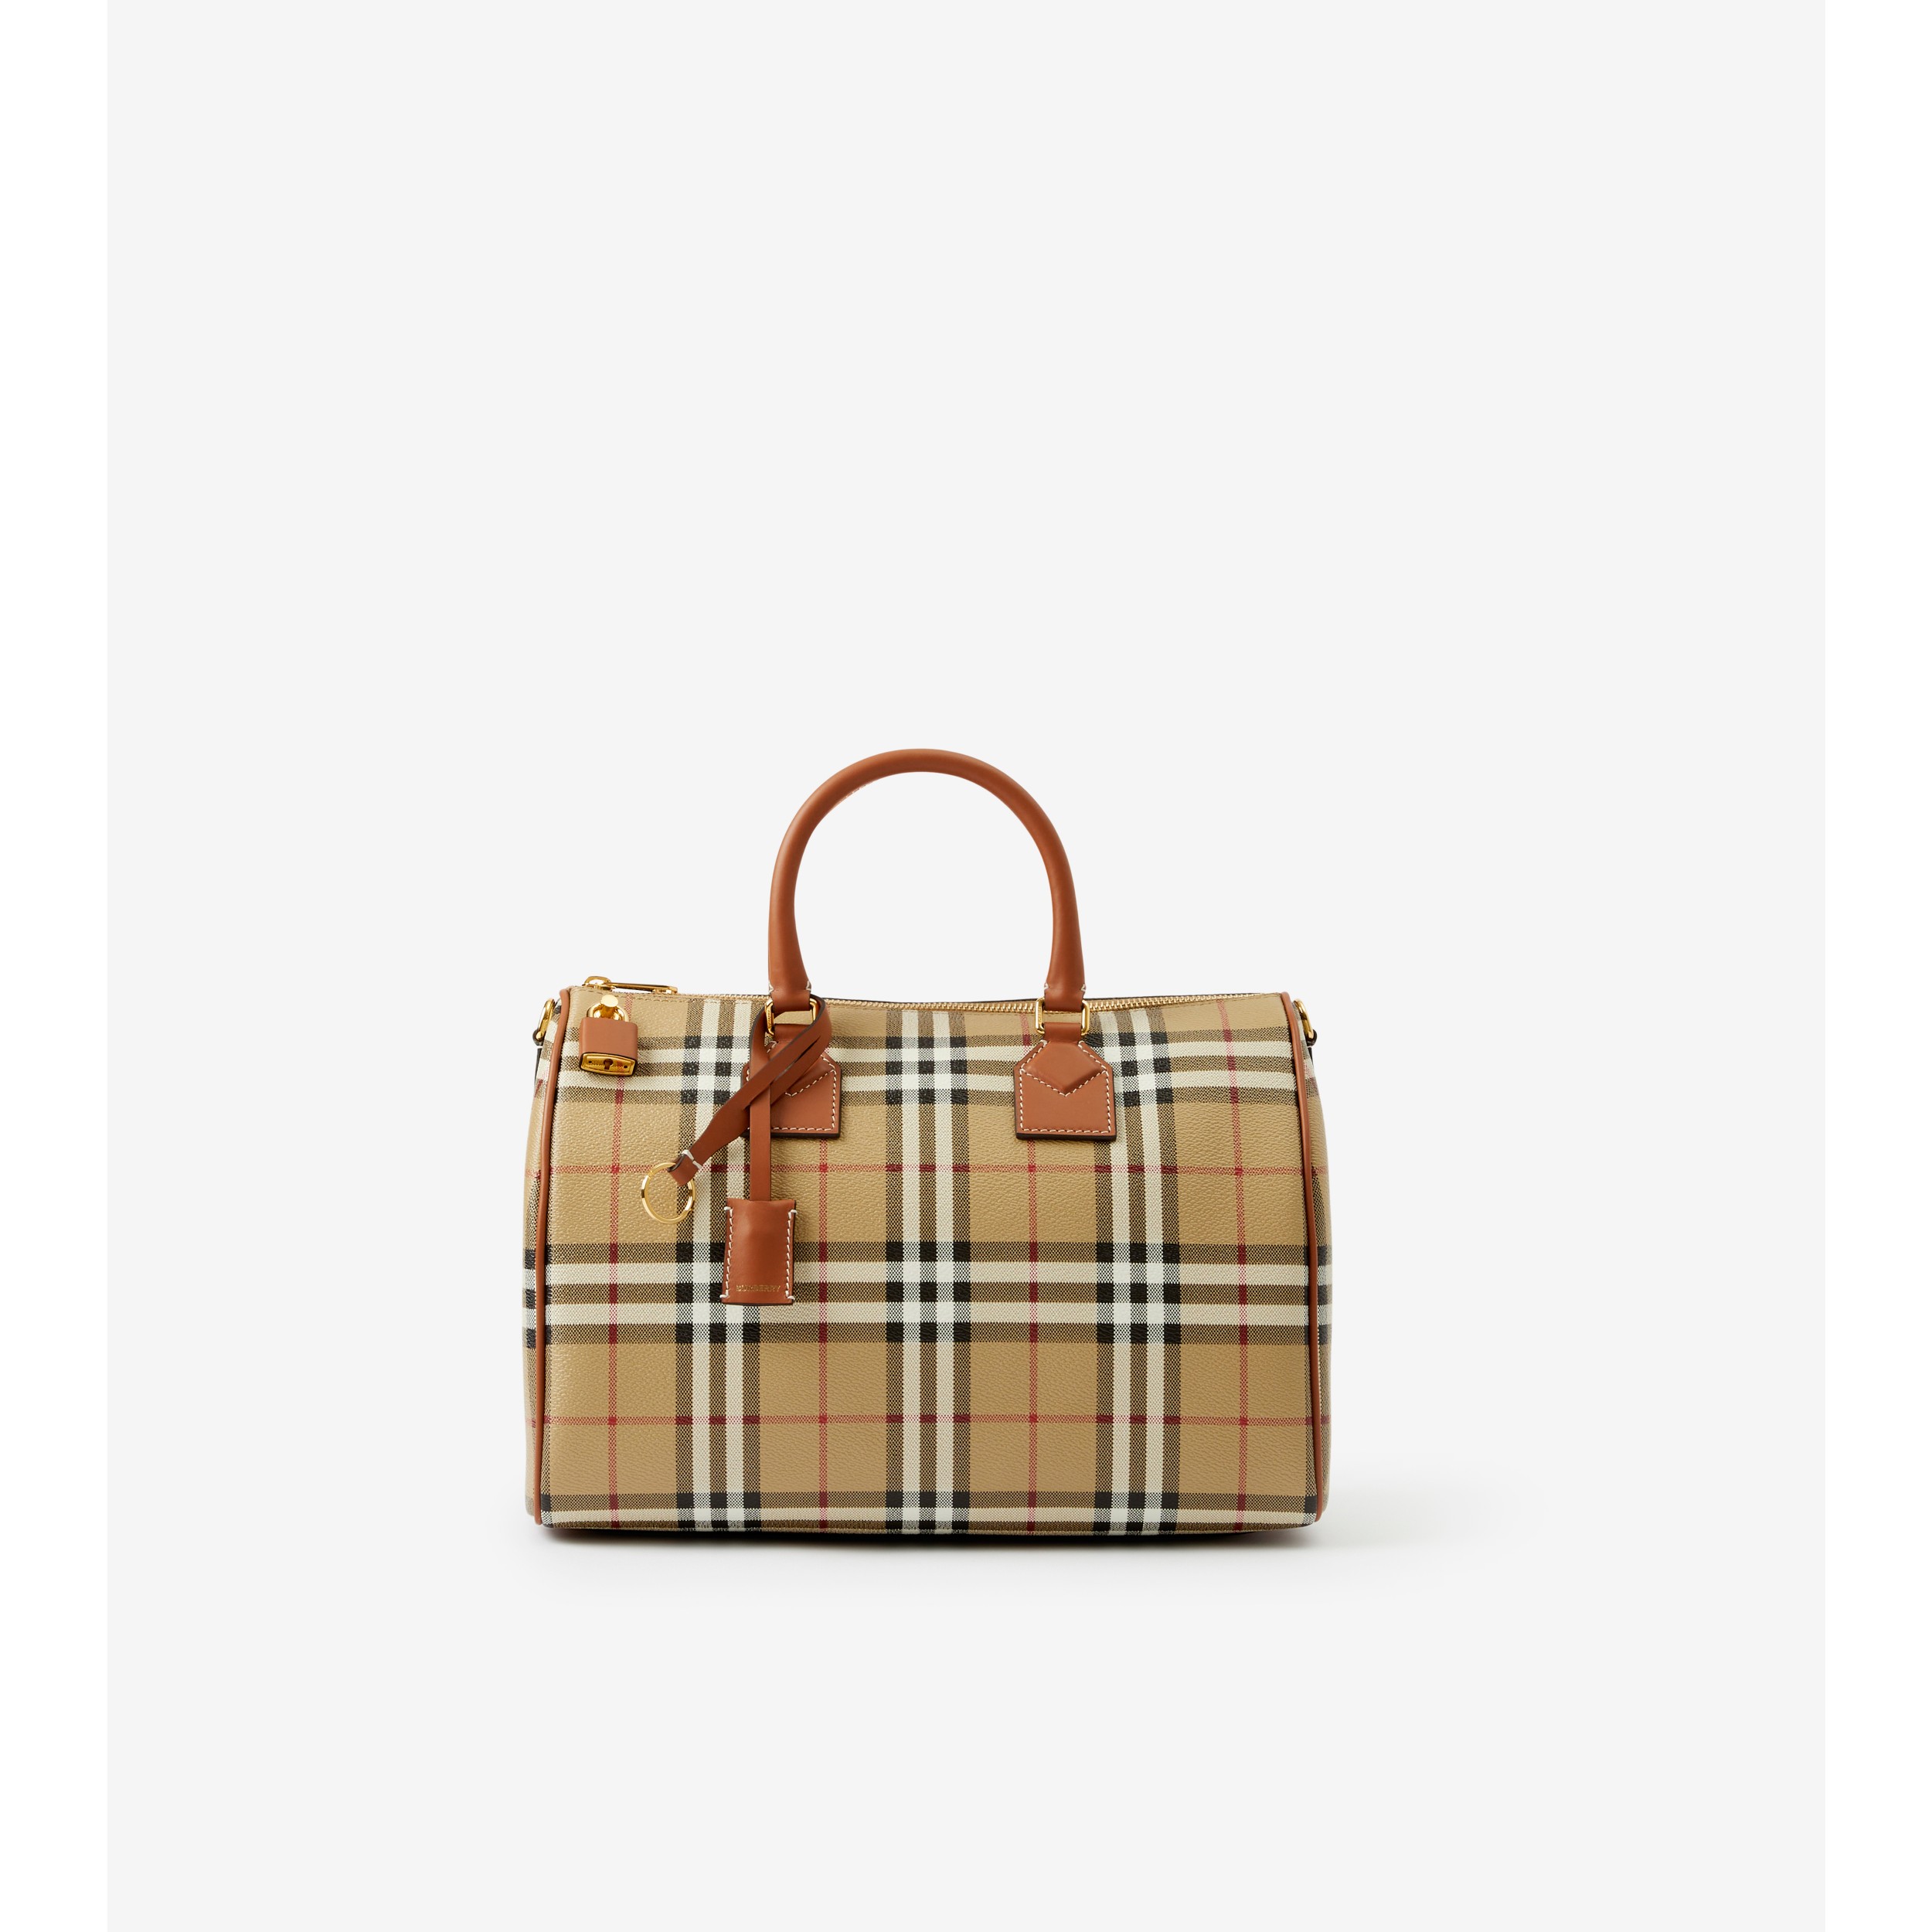 Burberry launches the new 'It' bag of Spring 2015